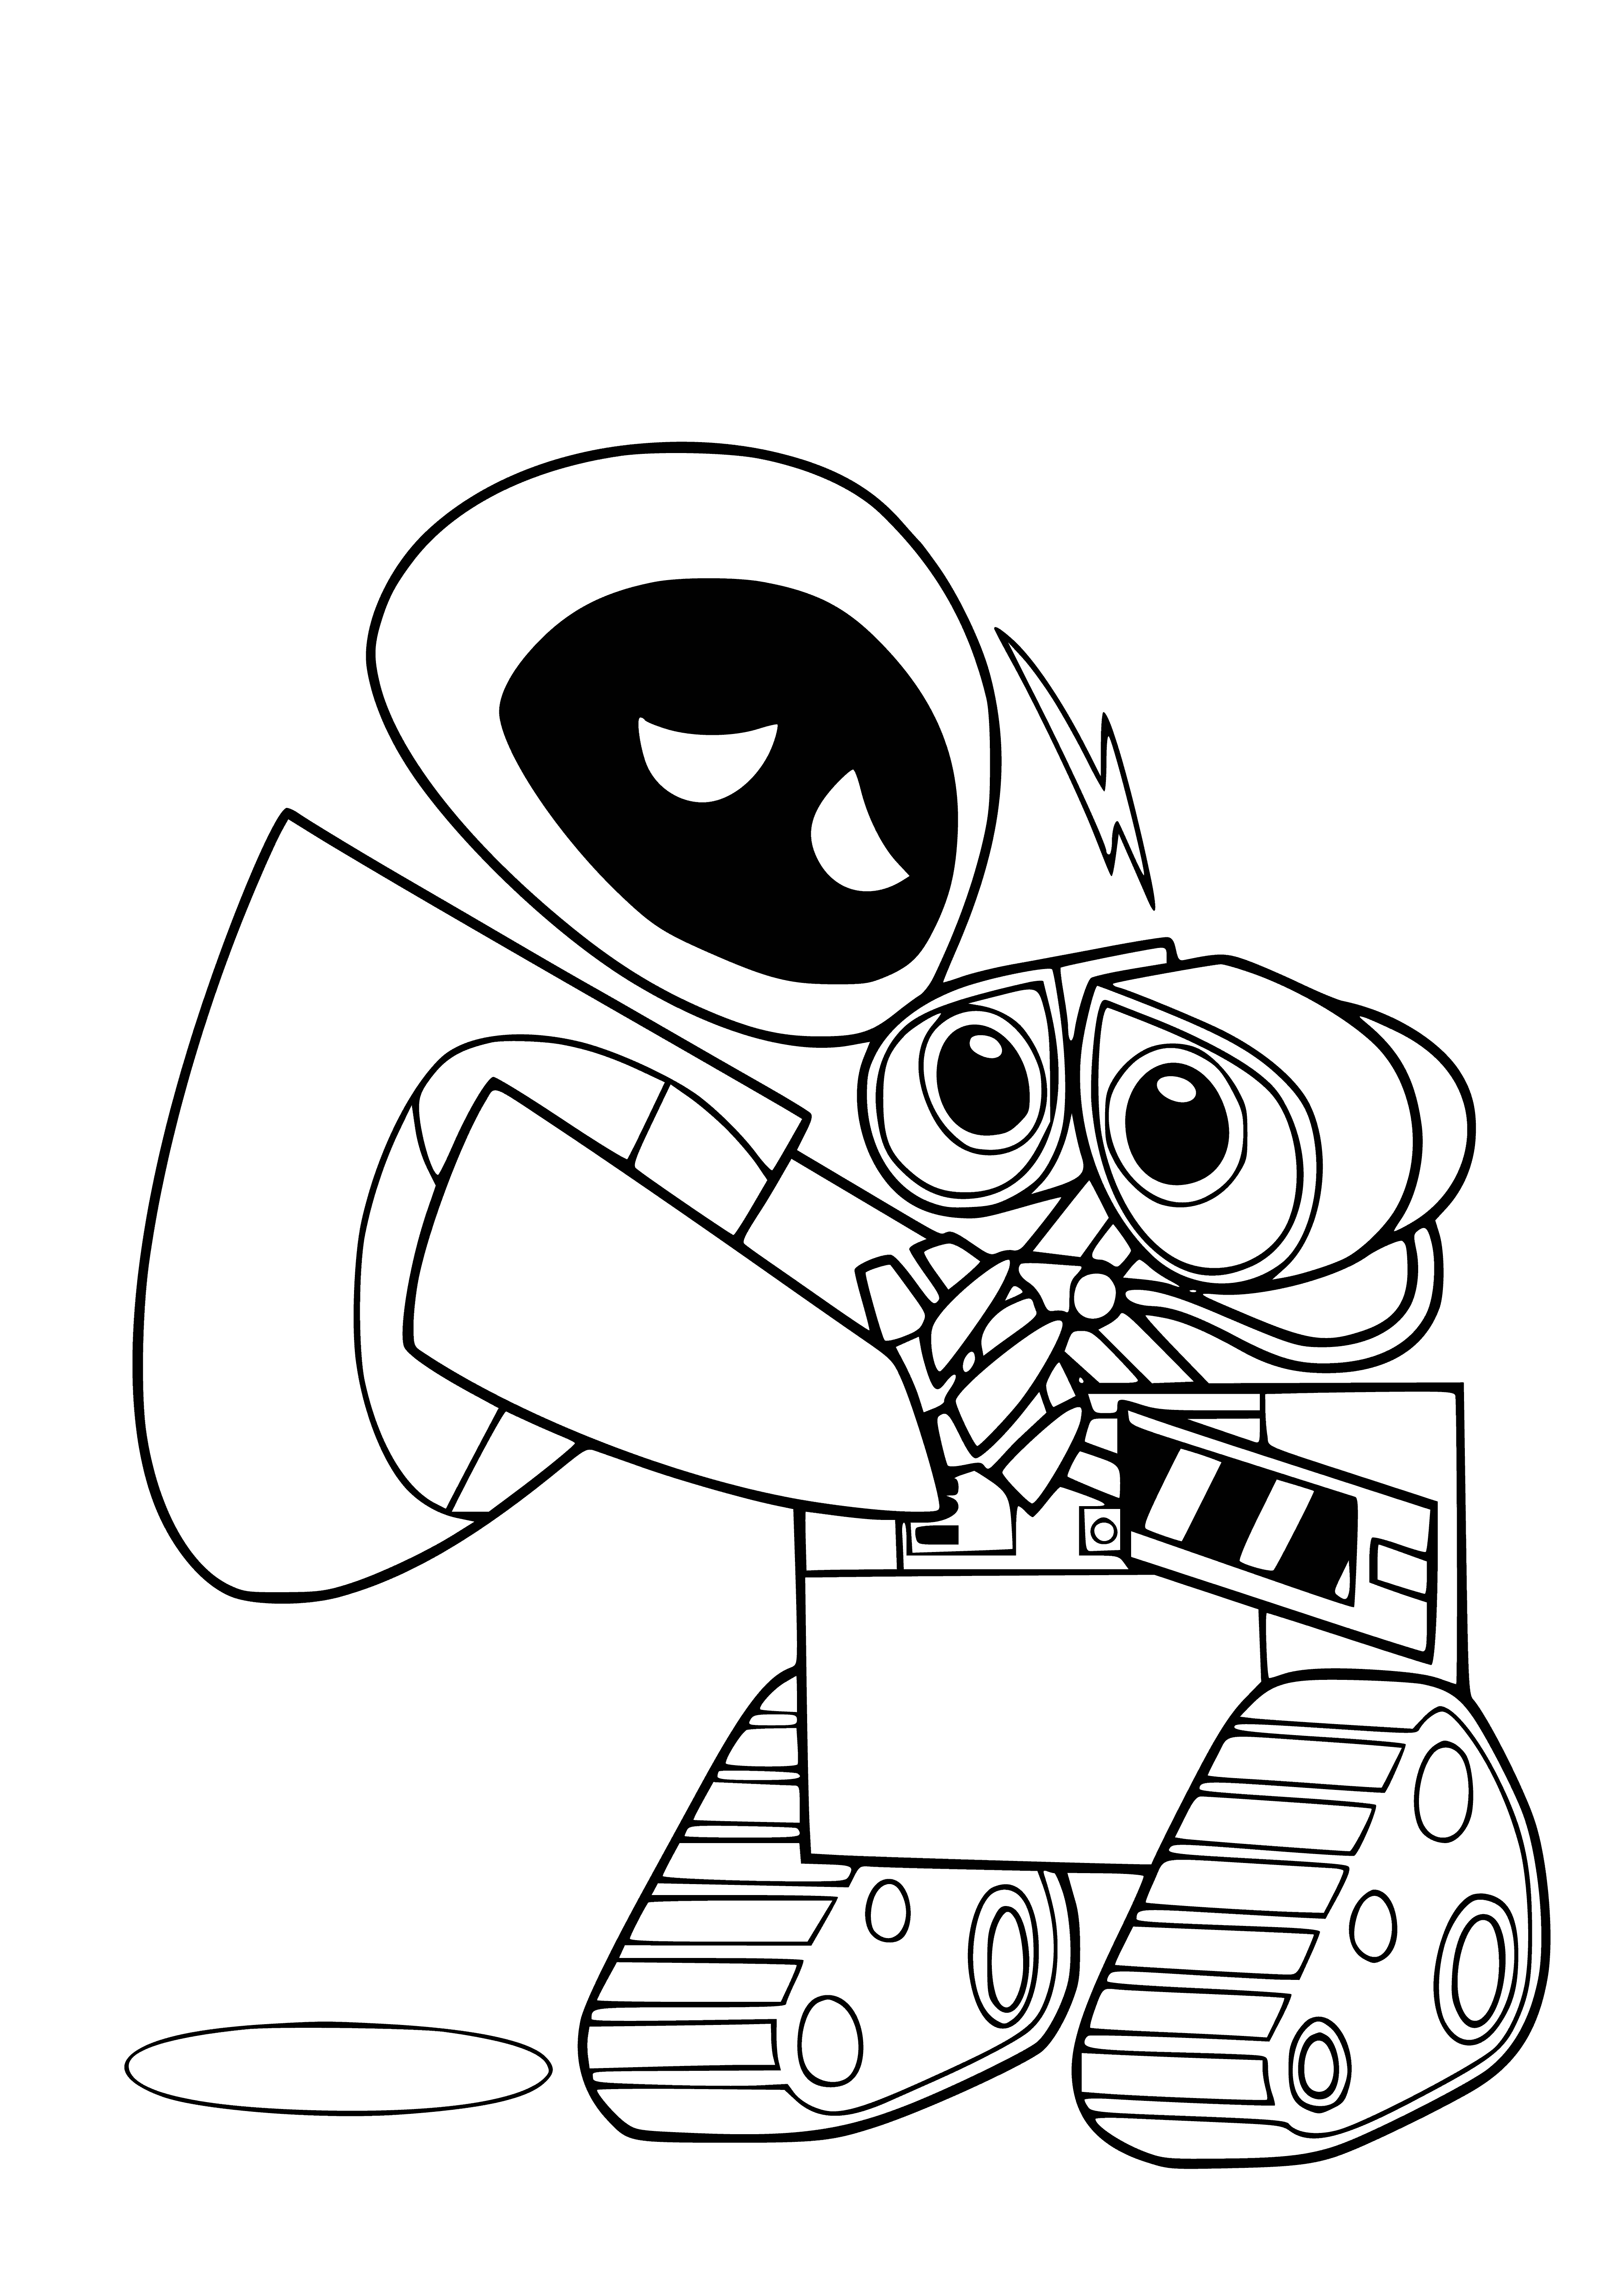 coloring page: Wall-e & Eve from movie Wall-e happily looking at each other in a coloring page. #ColoringBook